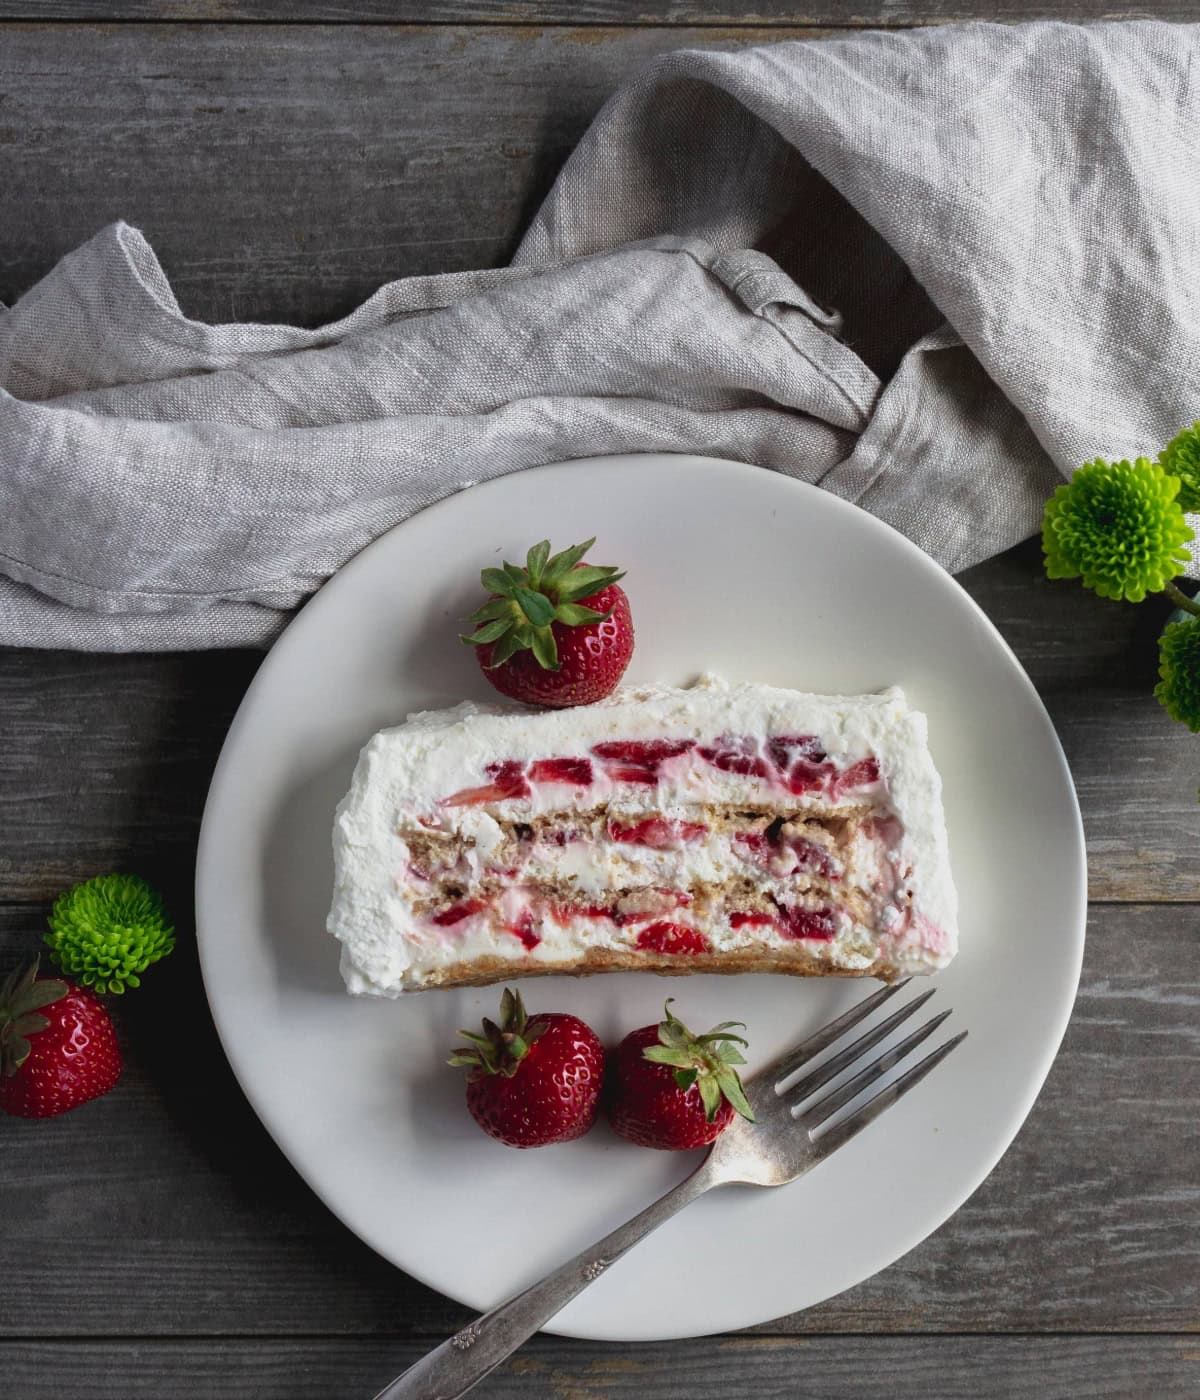 Slice of strawberries and cream cake on plate.